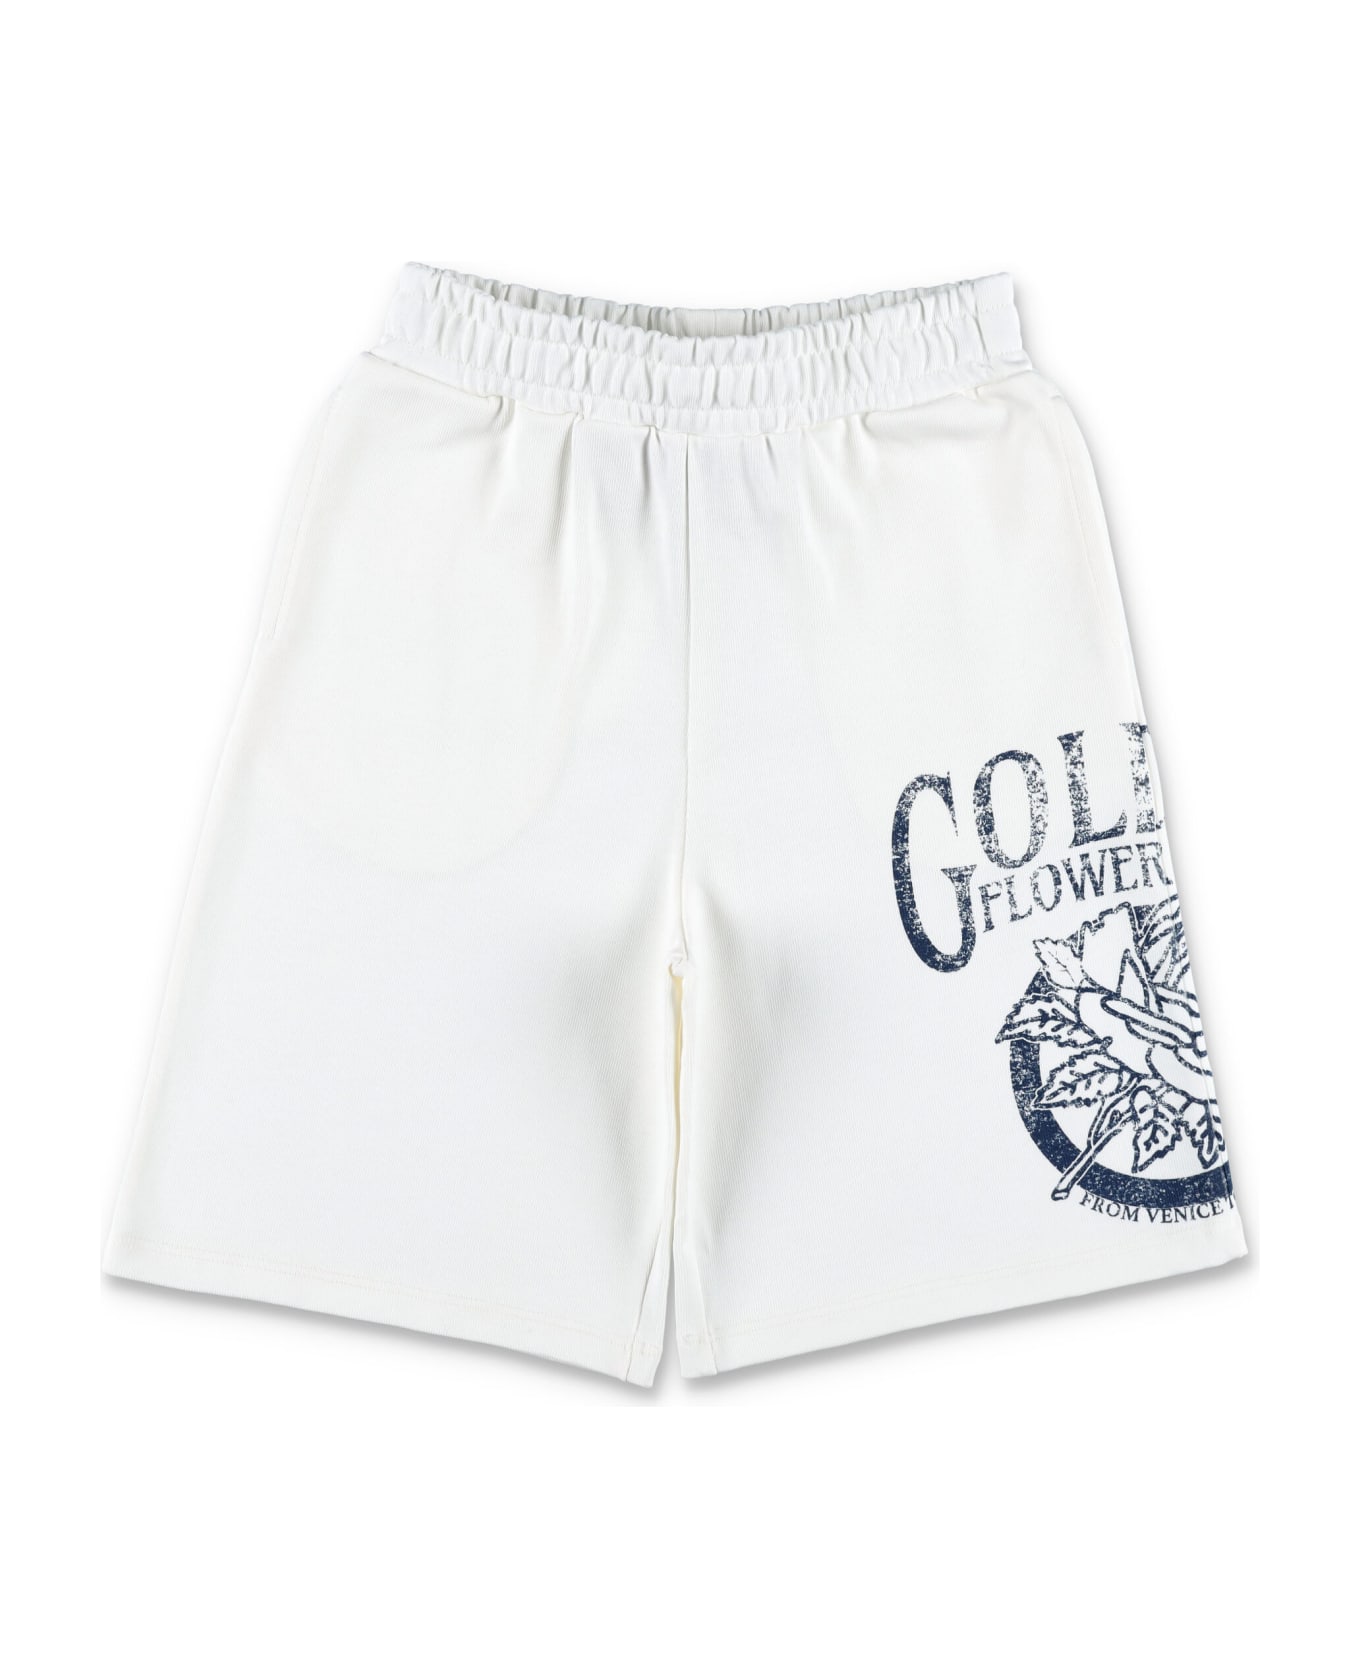 Golden Goose Printed Sweat-shorts - ARTIC WOLF/ECLIPSE ボトムス